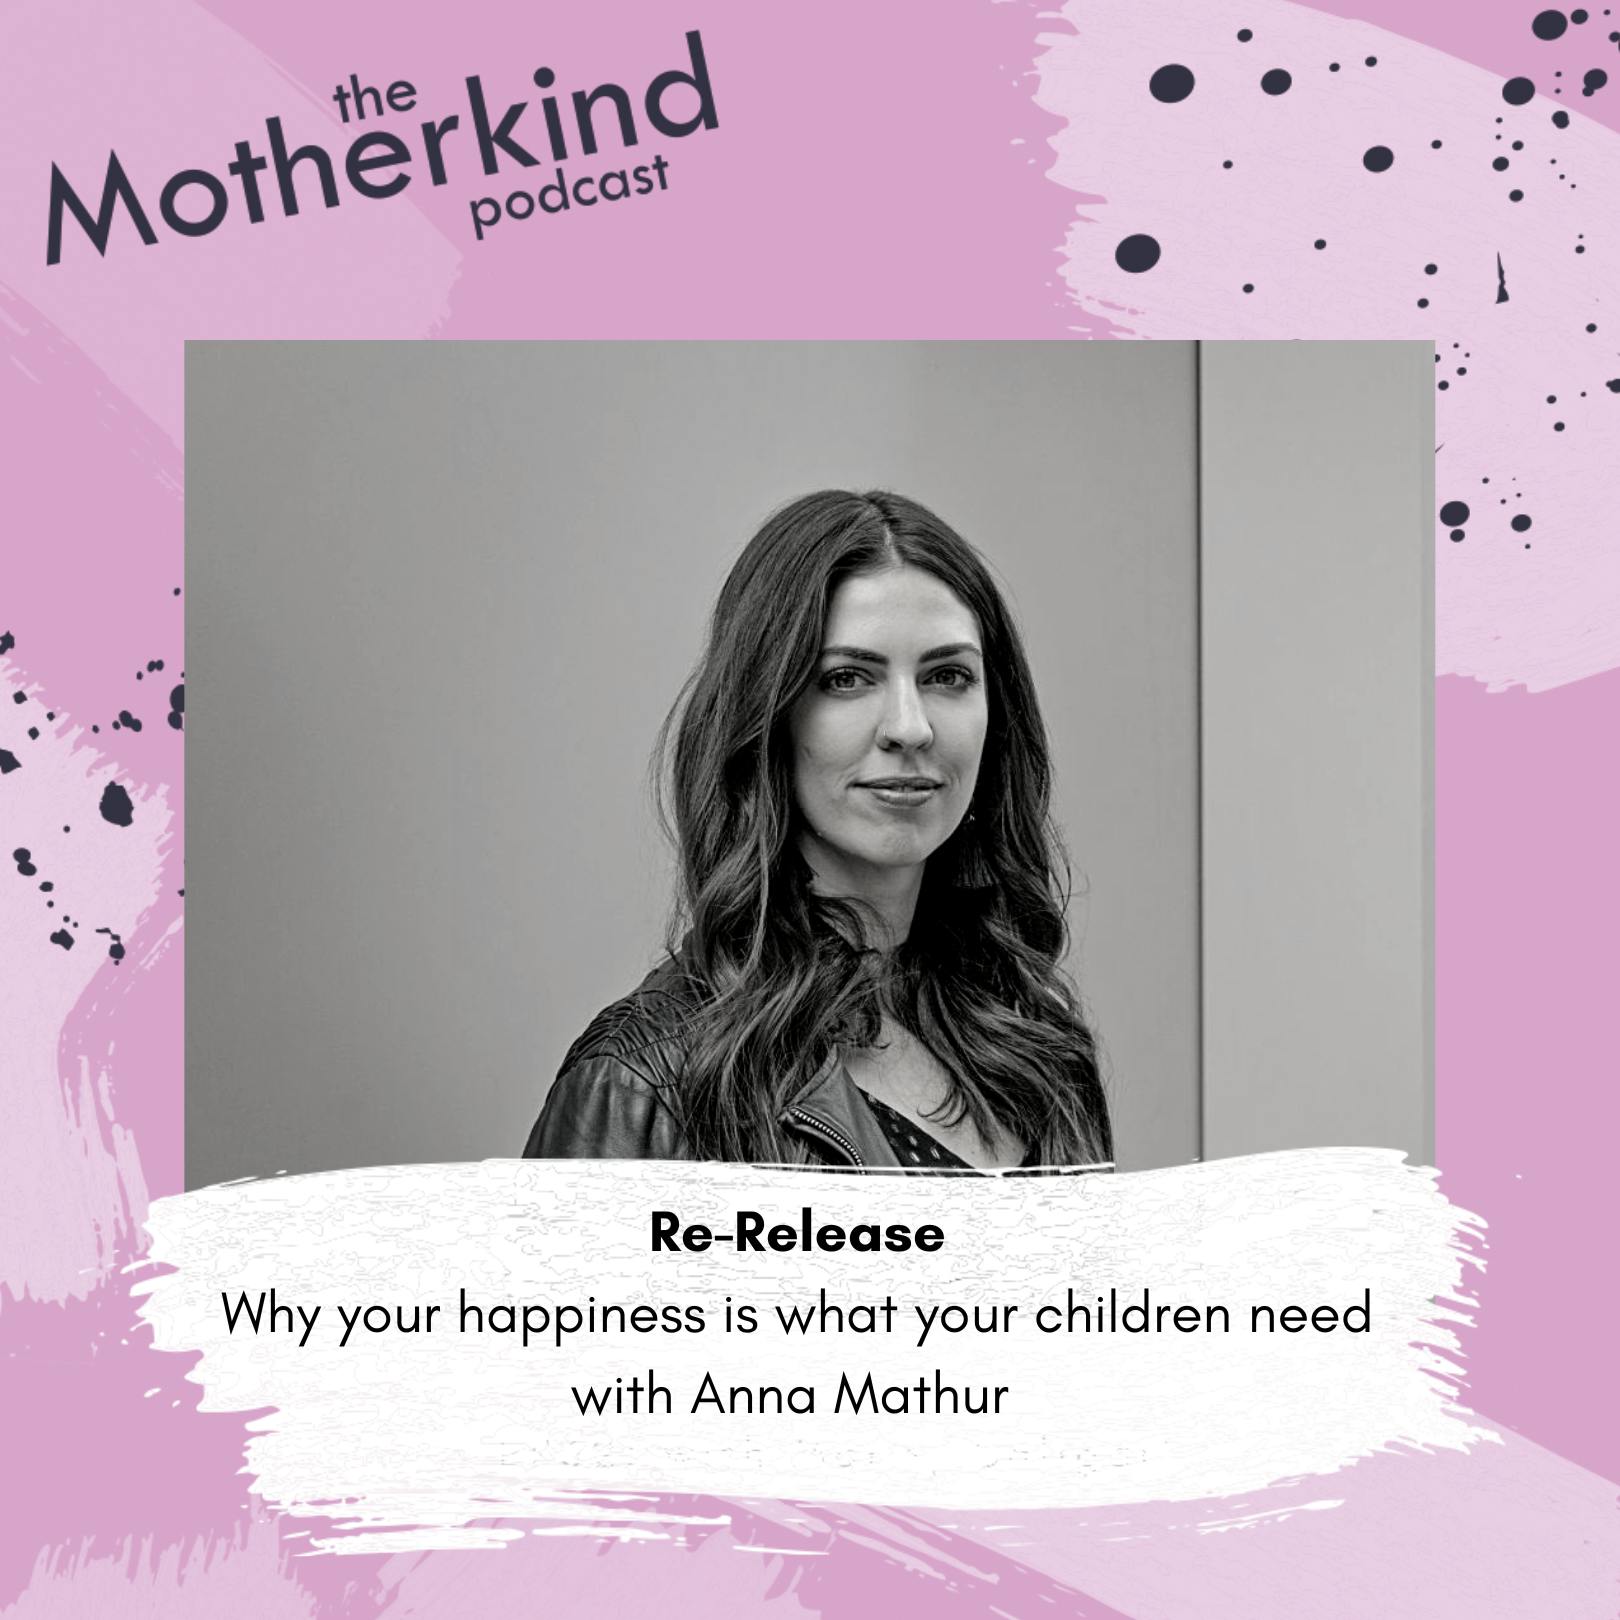 Re-Release | Why your happiness is what your children need with Anna Mathur